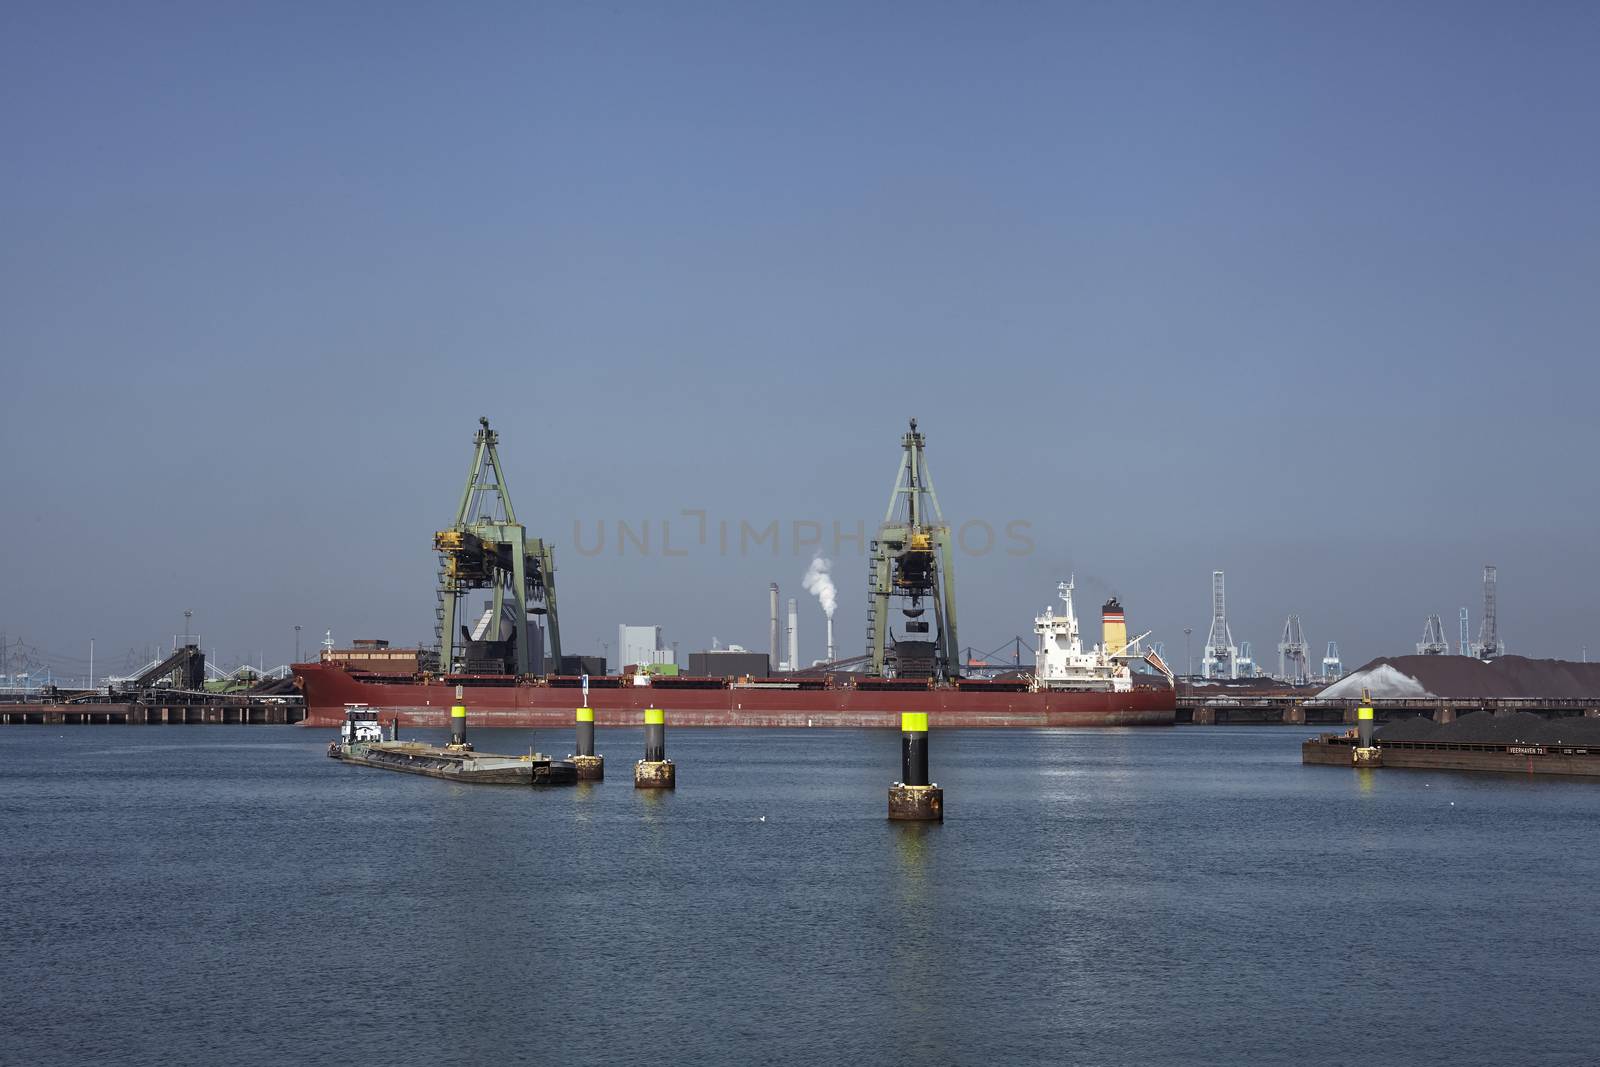 Coal industry in the harbor of rotterdam netherlands by janssenkruseproductions